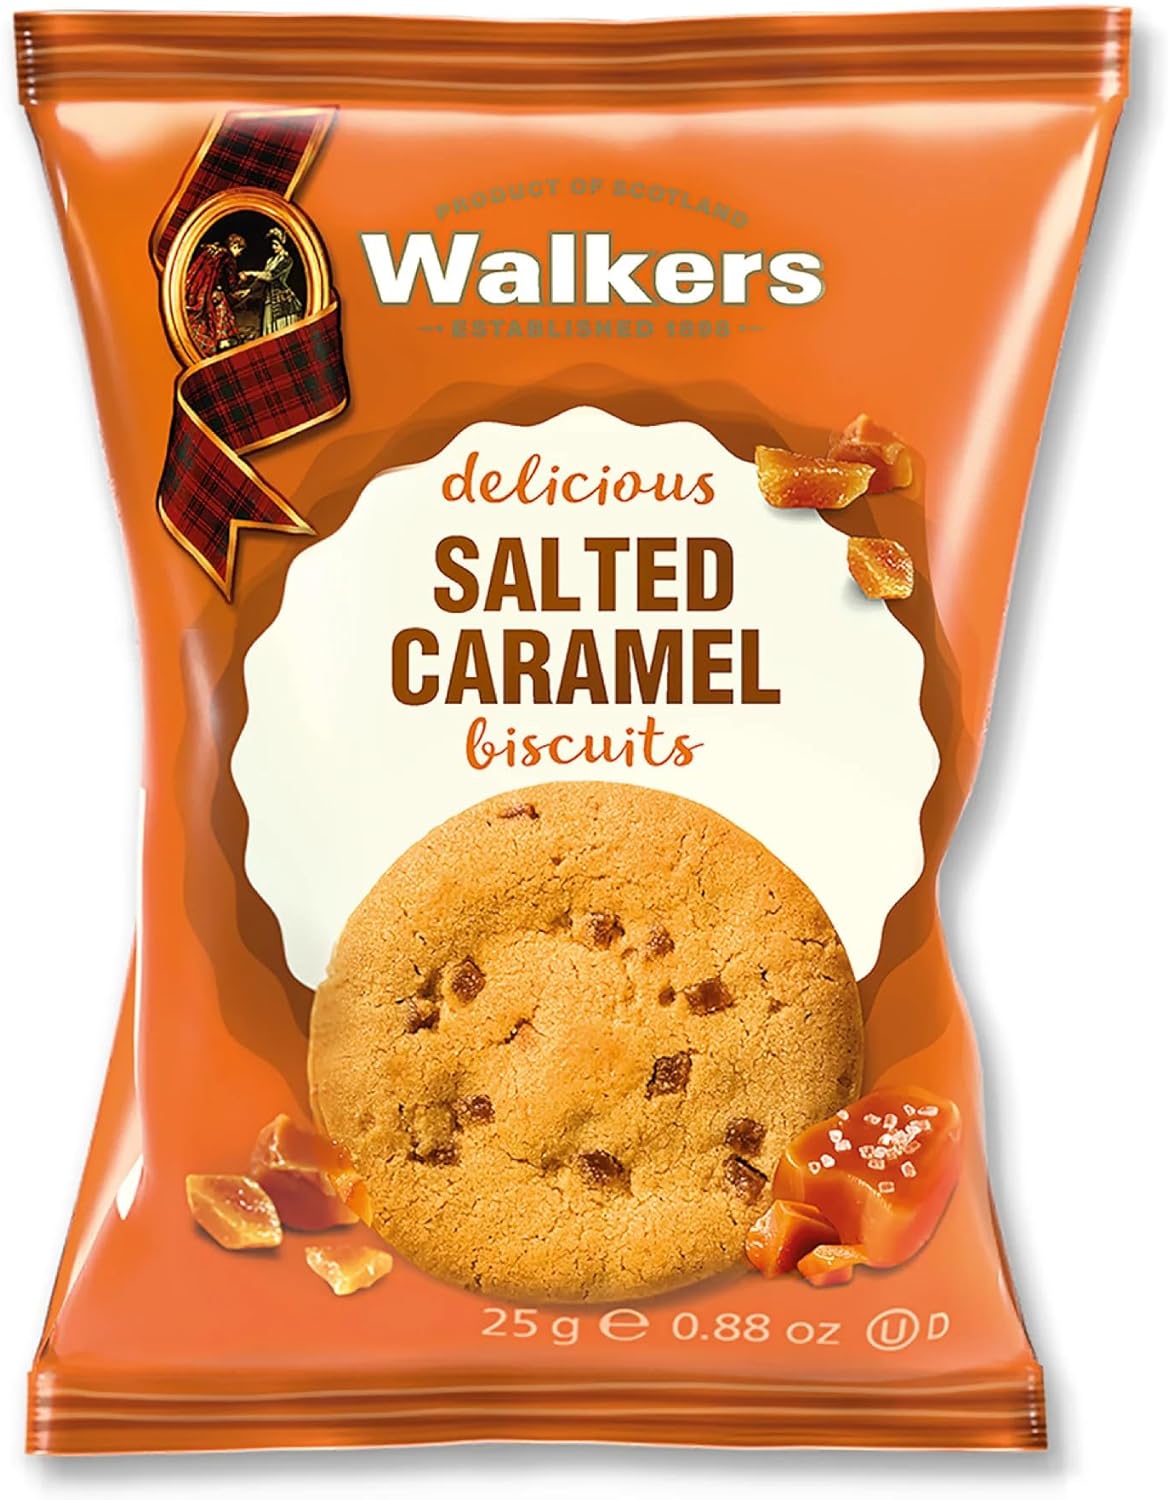 Walkers Salted Caramel Biscuits - 25g